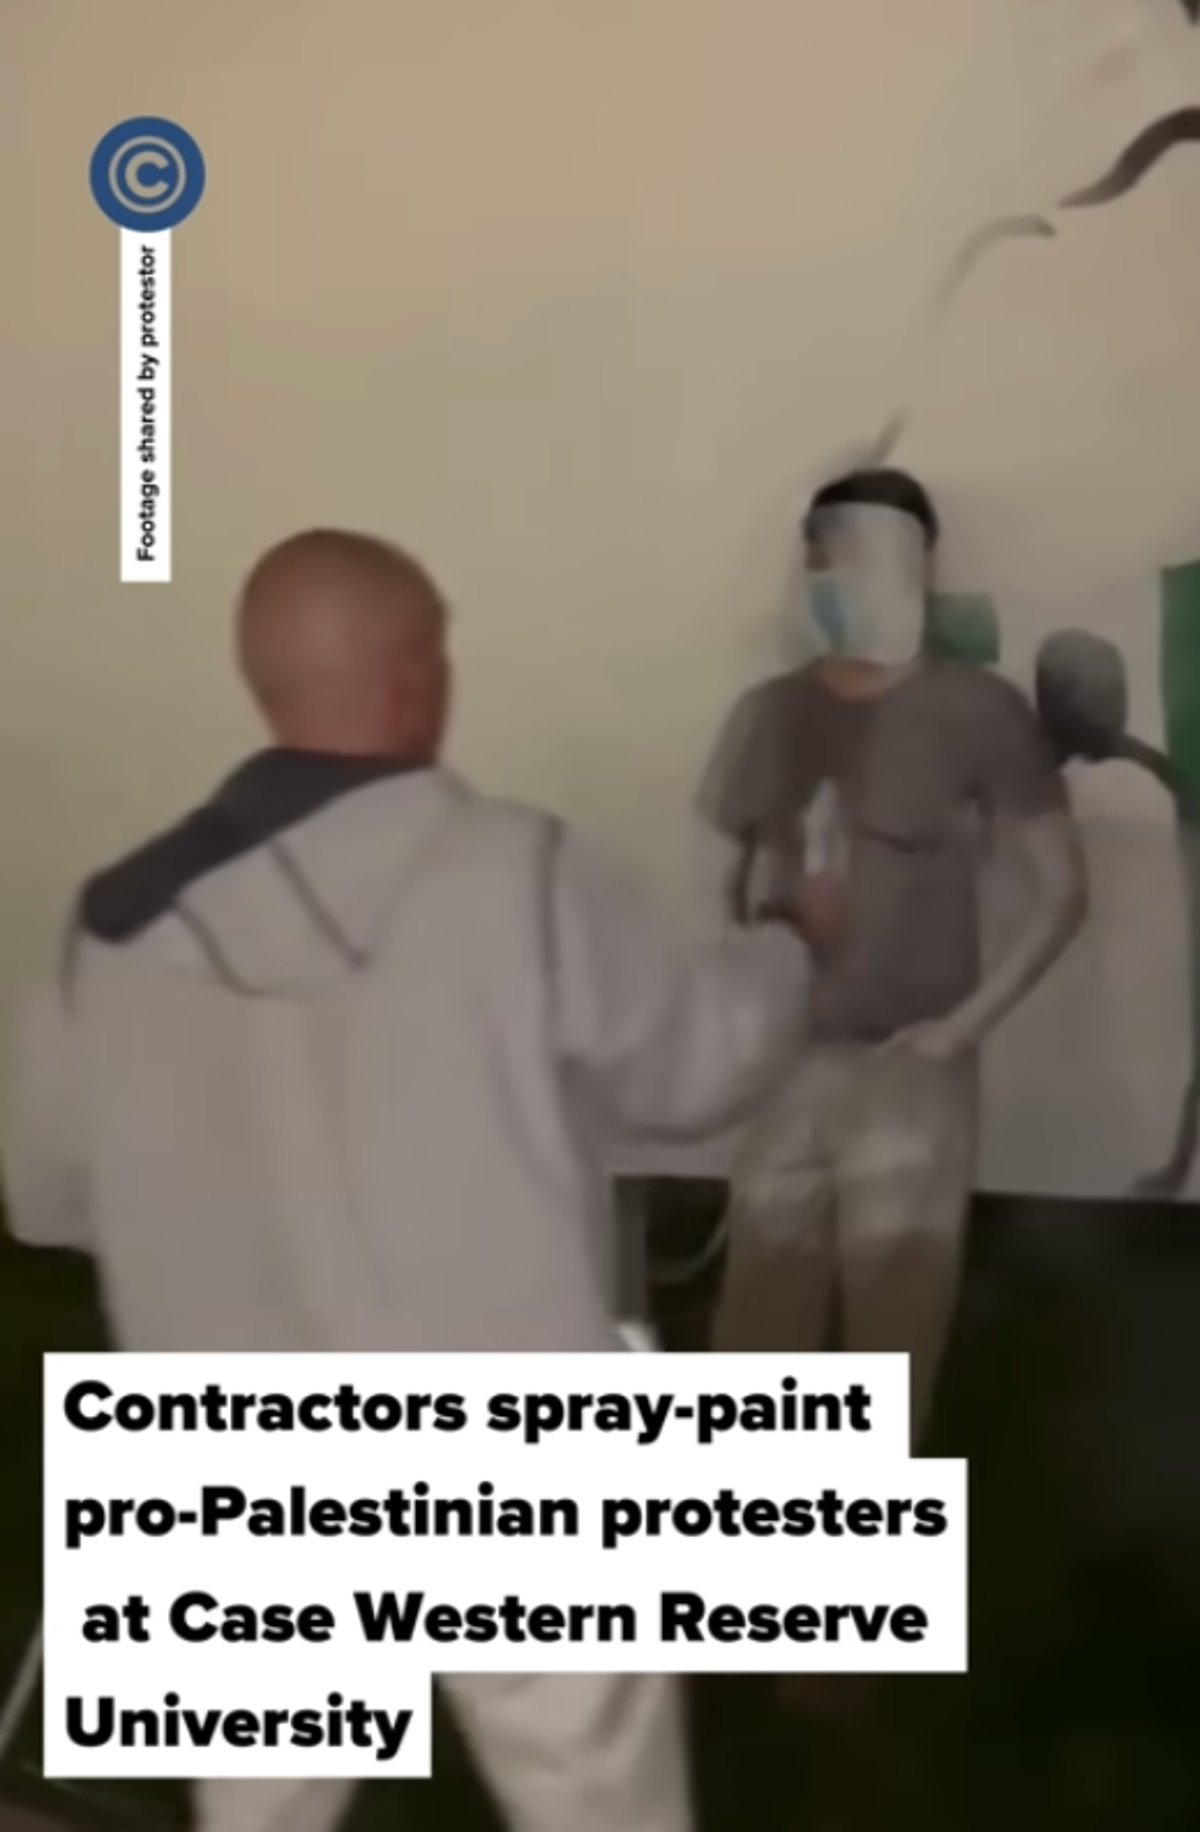 contractor paints over university gaza protesters to cover up a pro-palestine mural